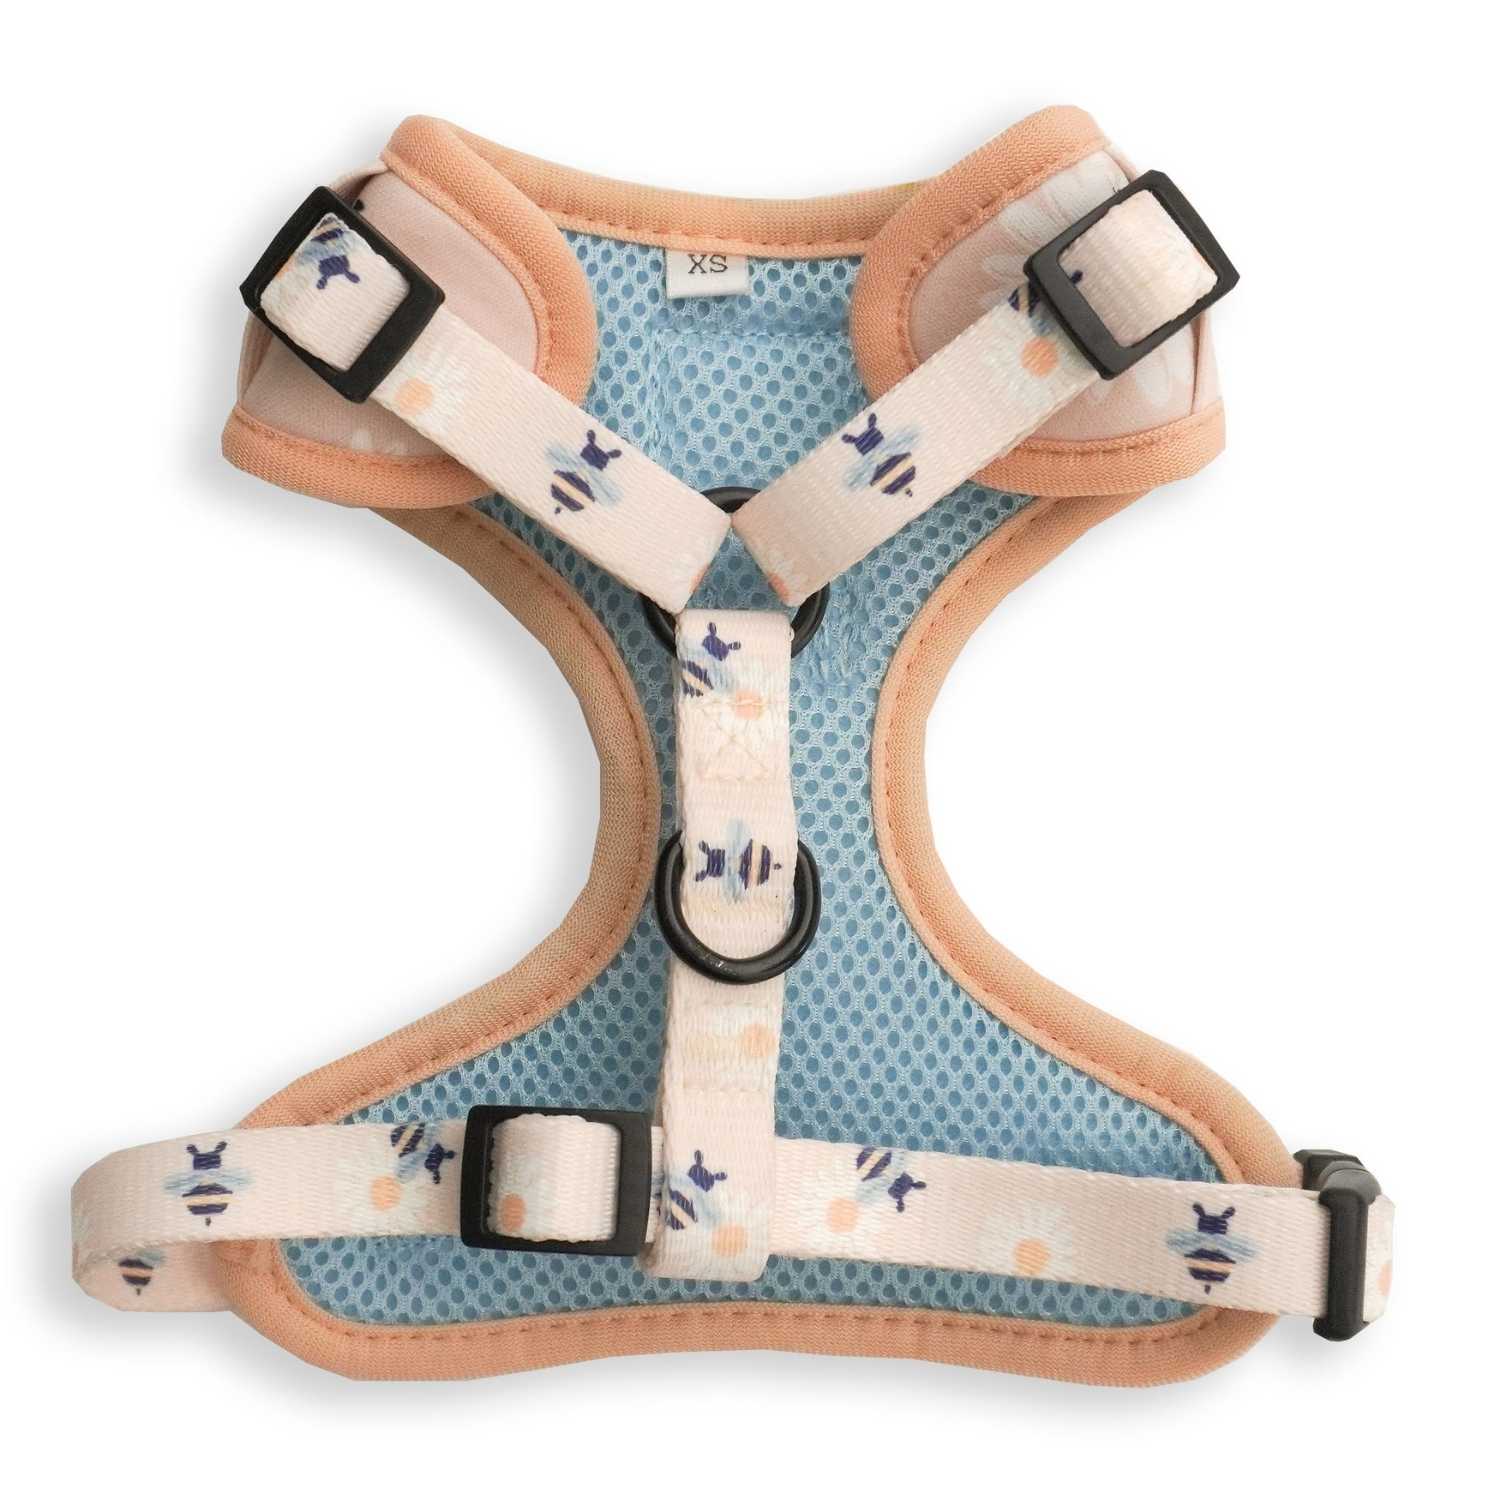 Aylabella Co. - Bee With You Harness - Dog Accessories (5 Sizes)